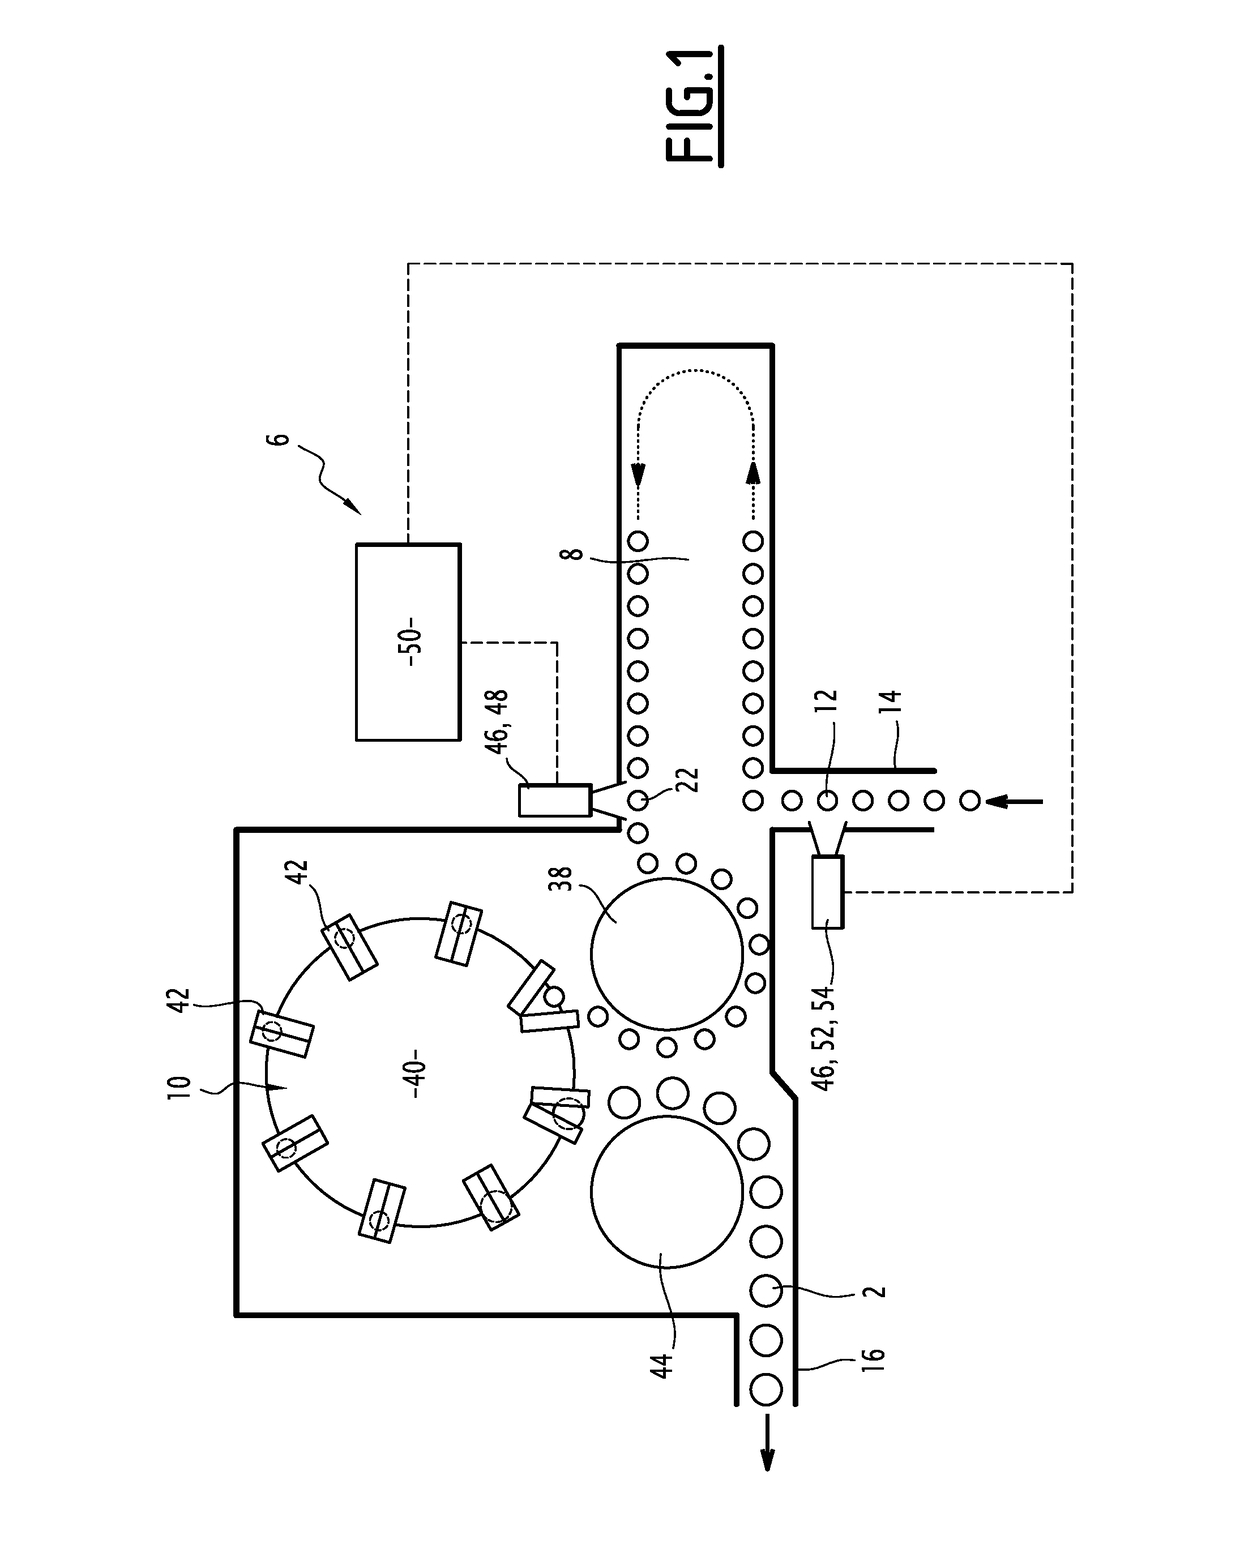 Method and machine for producing containers by injecting a liquid inside successive preforms